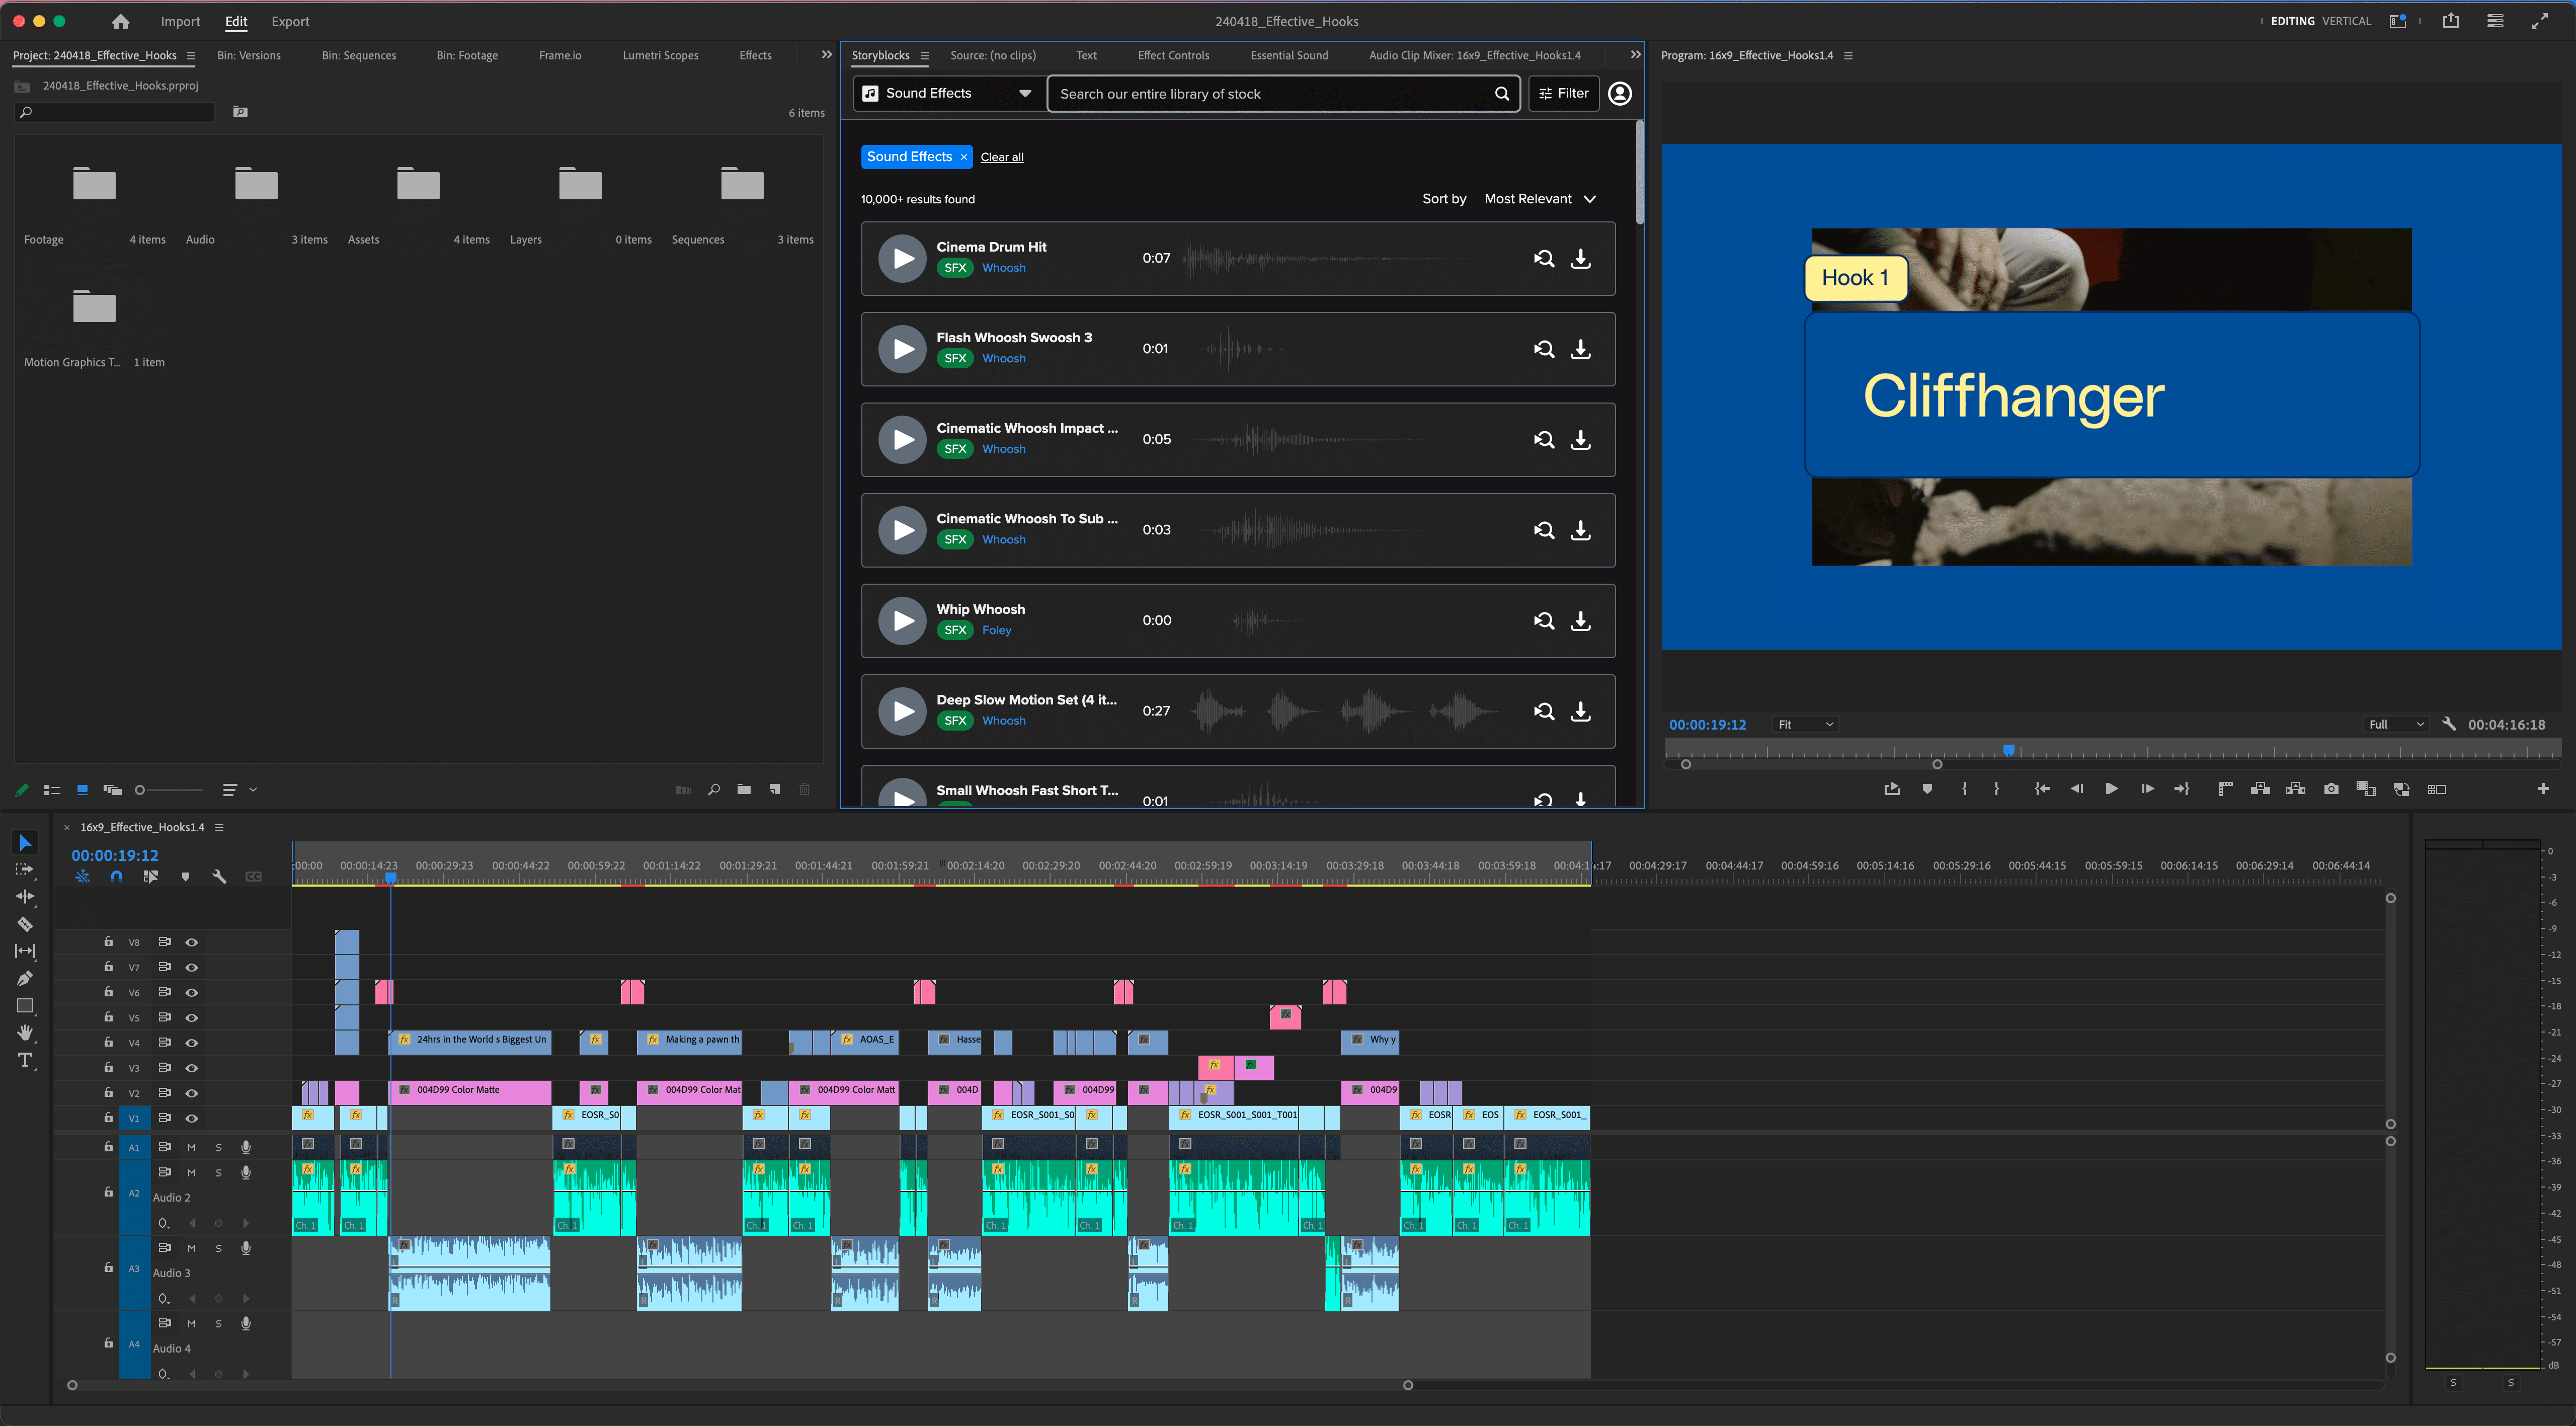 How to add sound effects in Premiere Pro